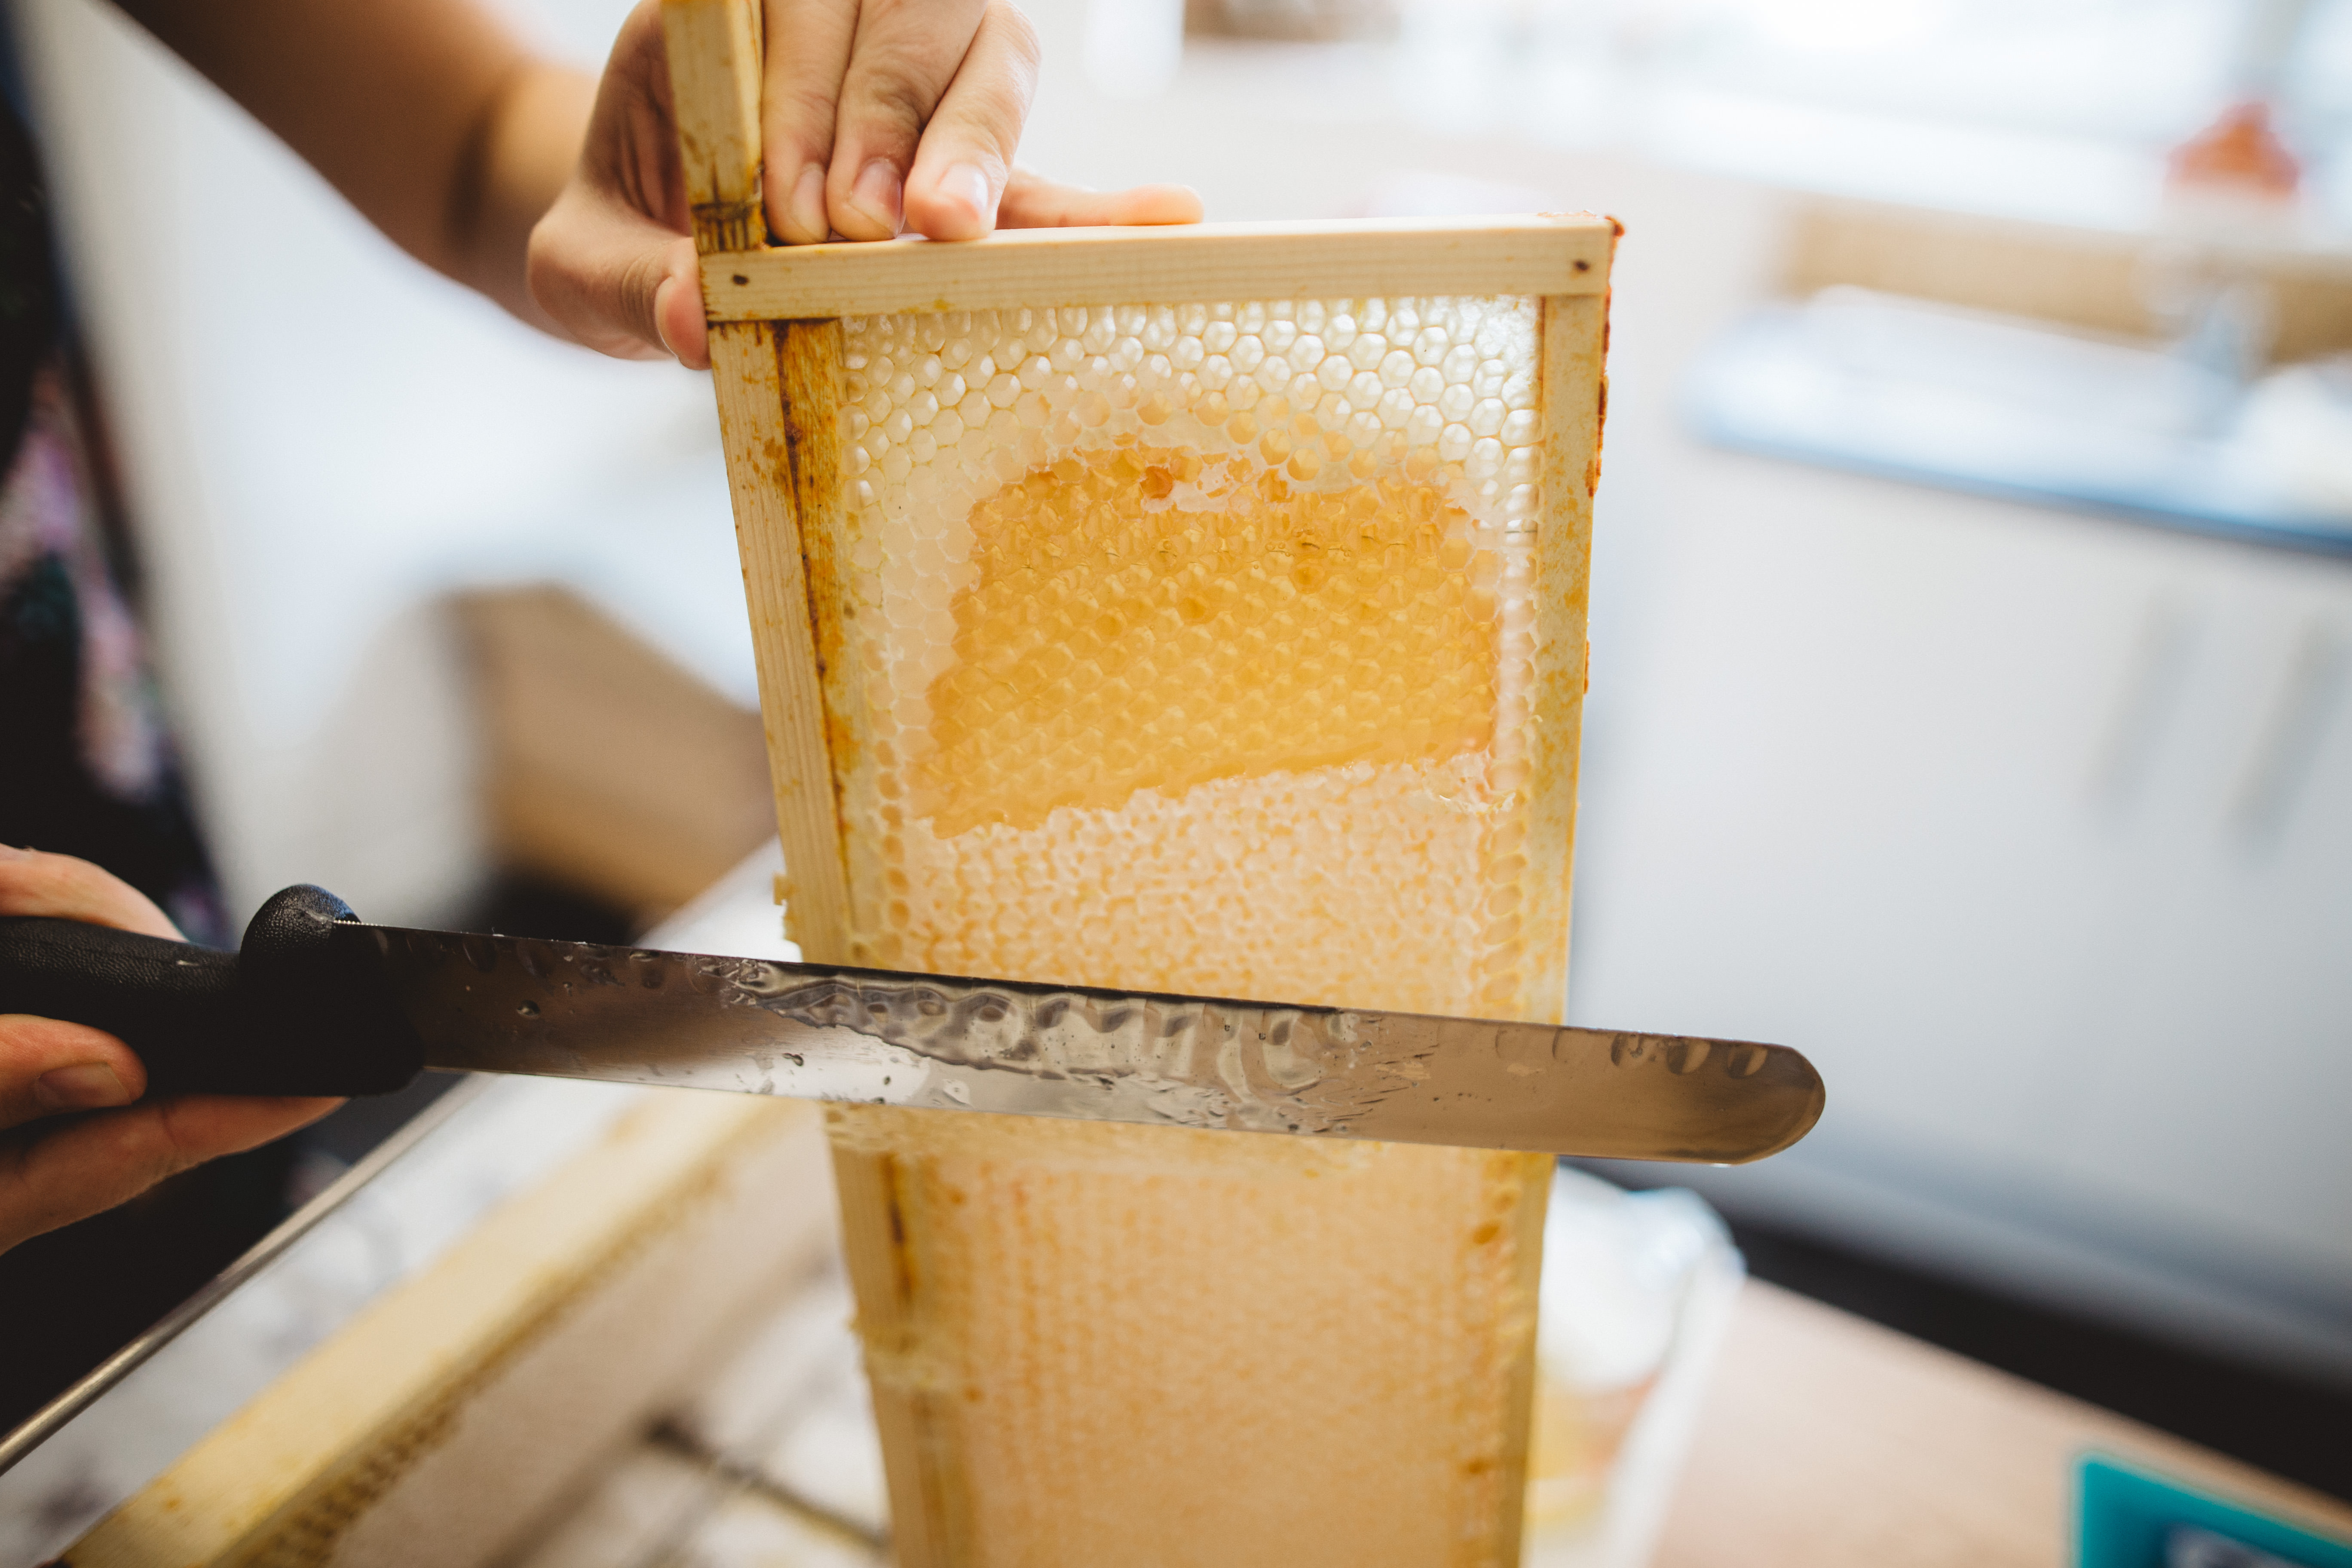 Scraping the Honey from the Wax